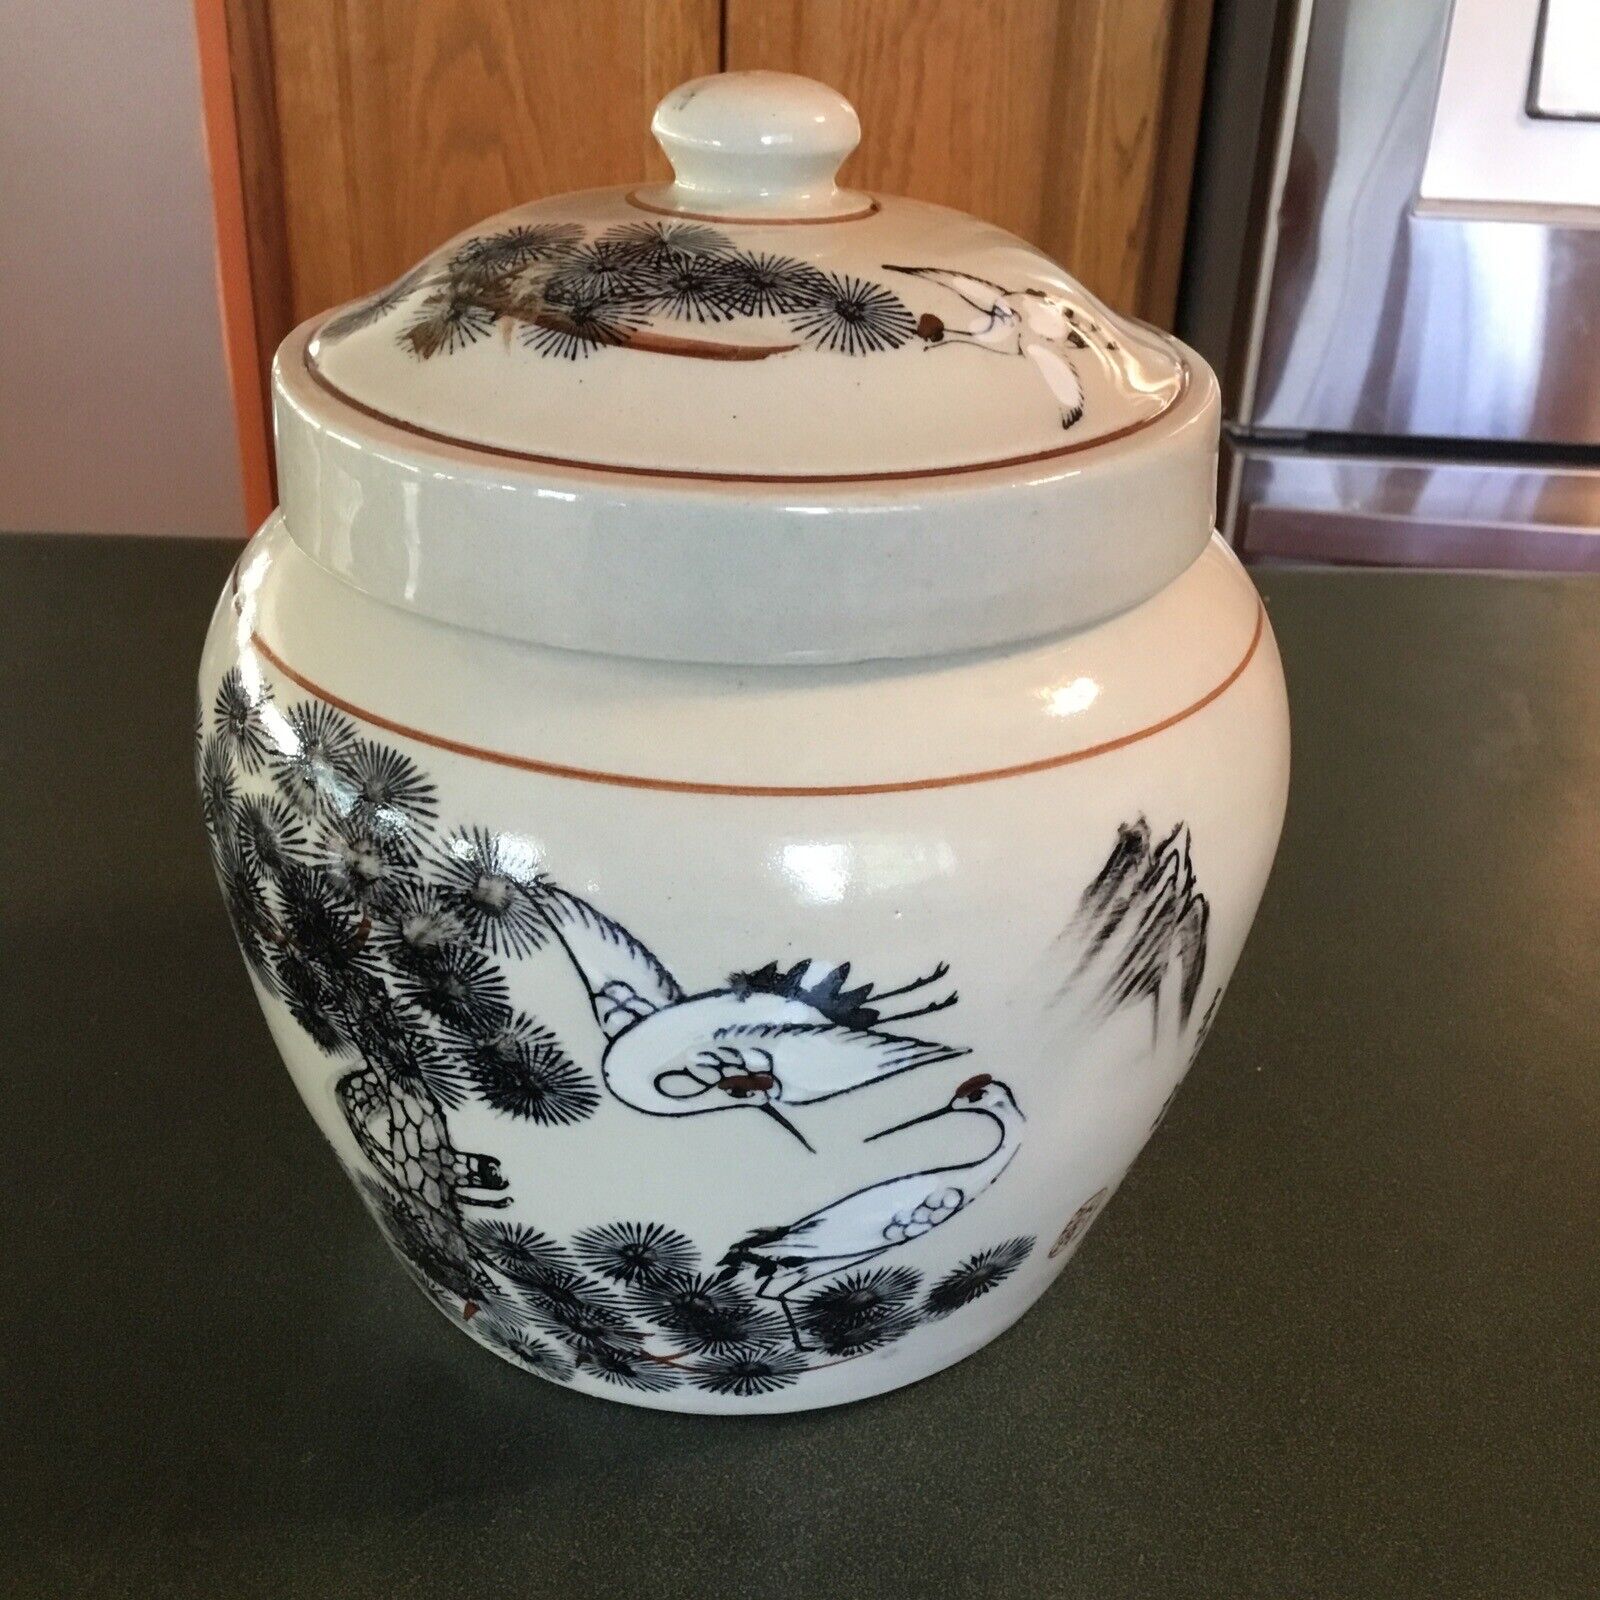 Asian Chinese or Japanese Cranes Birds Landscape 7by8 Stoneware Crock Jardeniere